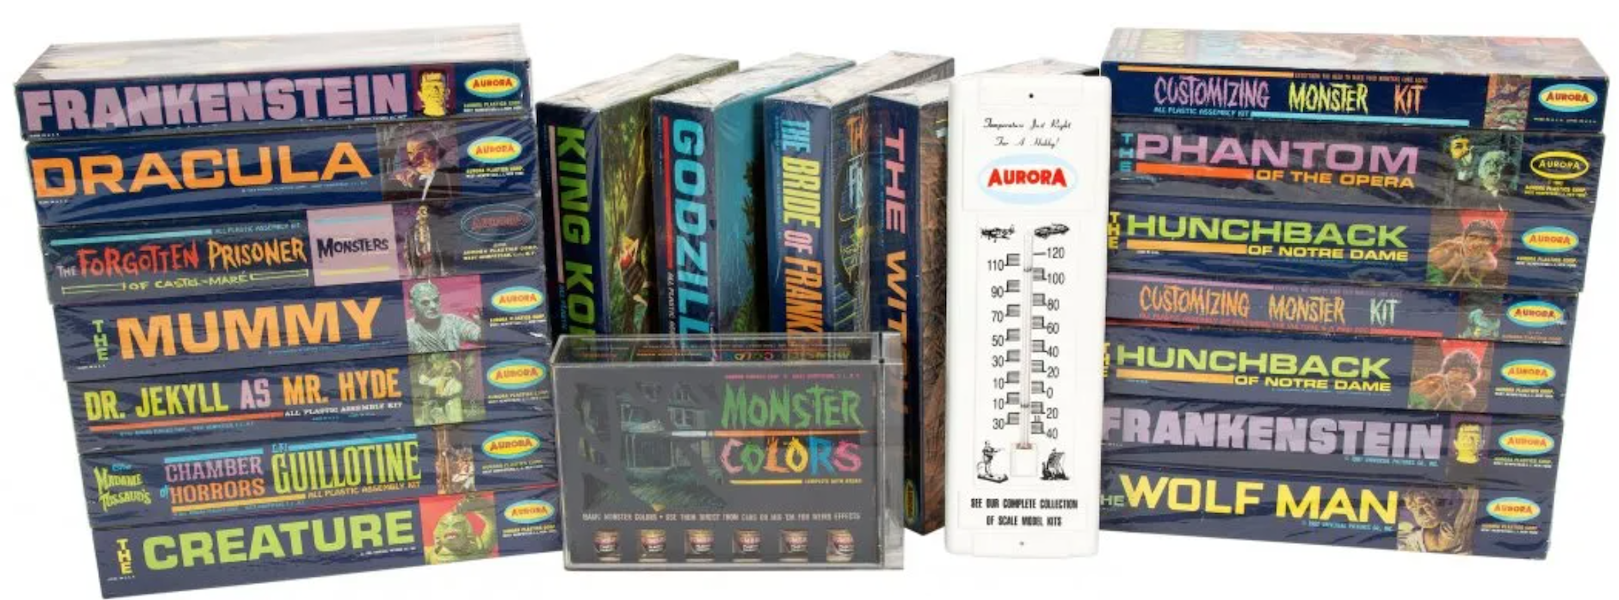 A complete, unopened vintage set of 20 Aurora monster model kits achieved $39,000 plus the buyer’s premium in November 2021. Image courtesy of Heritage Auctions and LiveAuctioneers.